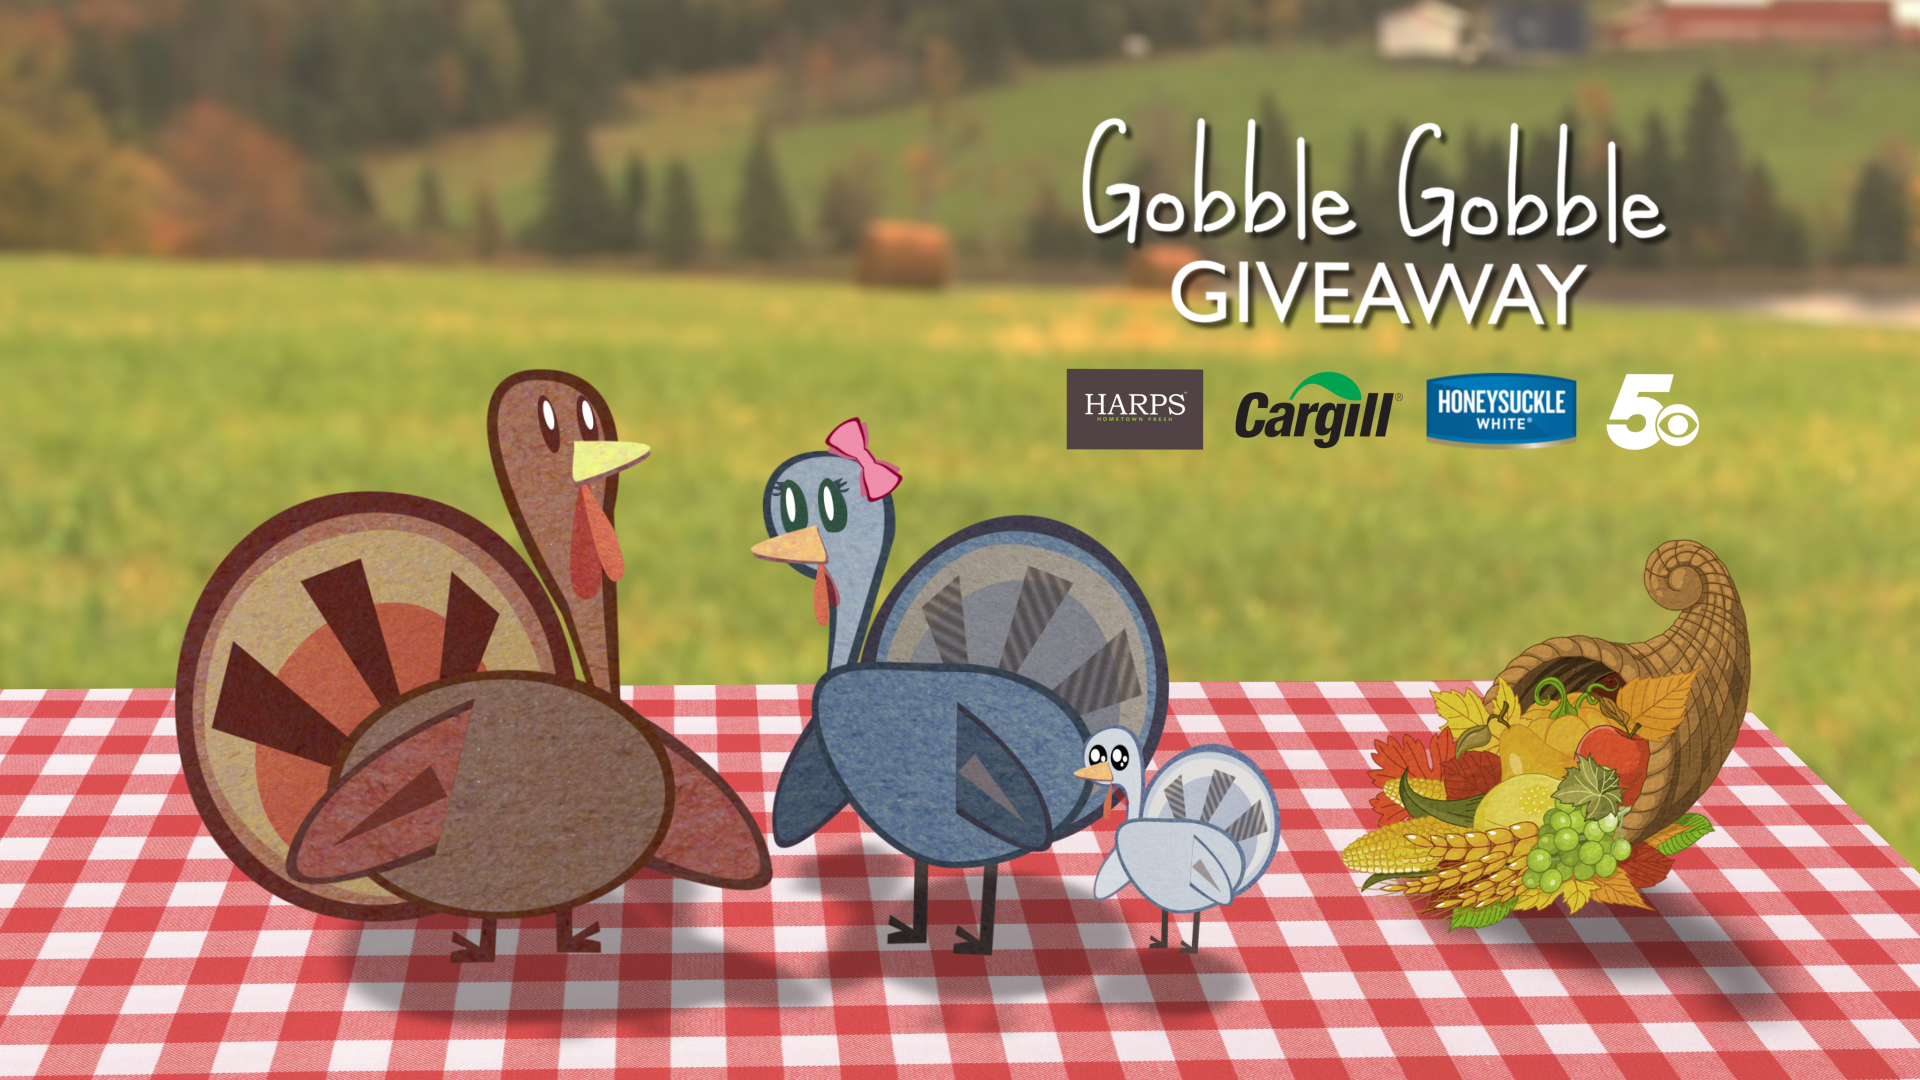 Gobble Gobble Giveaway 2021